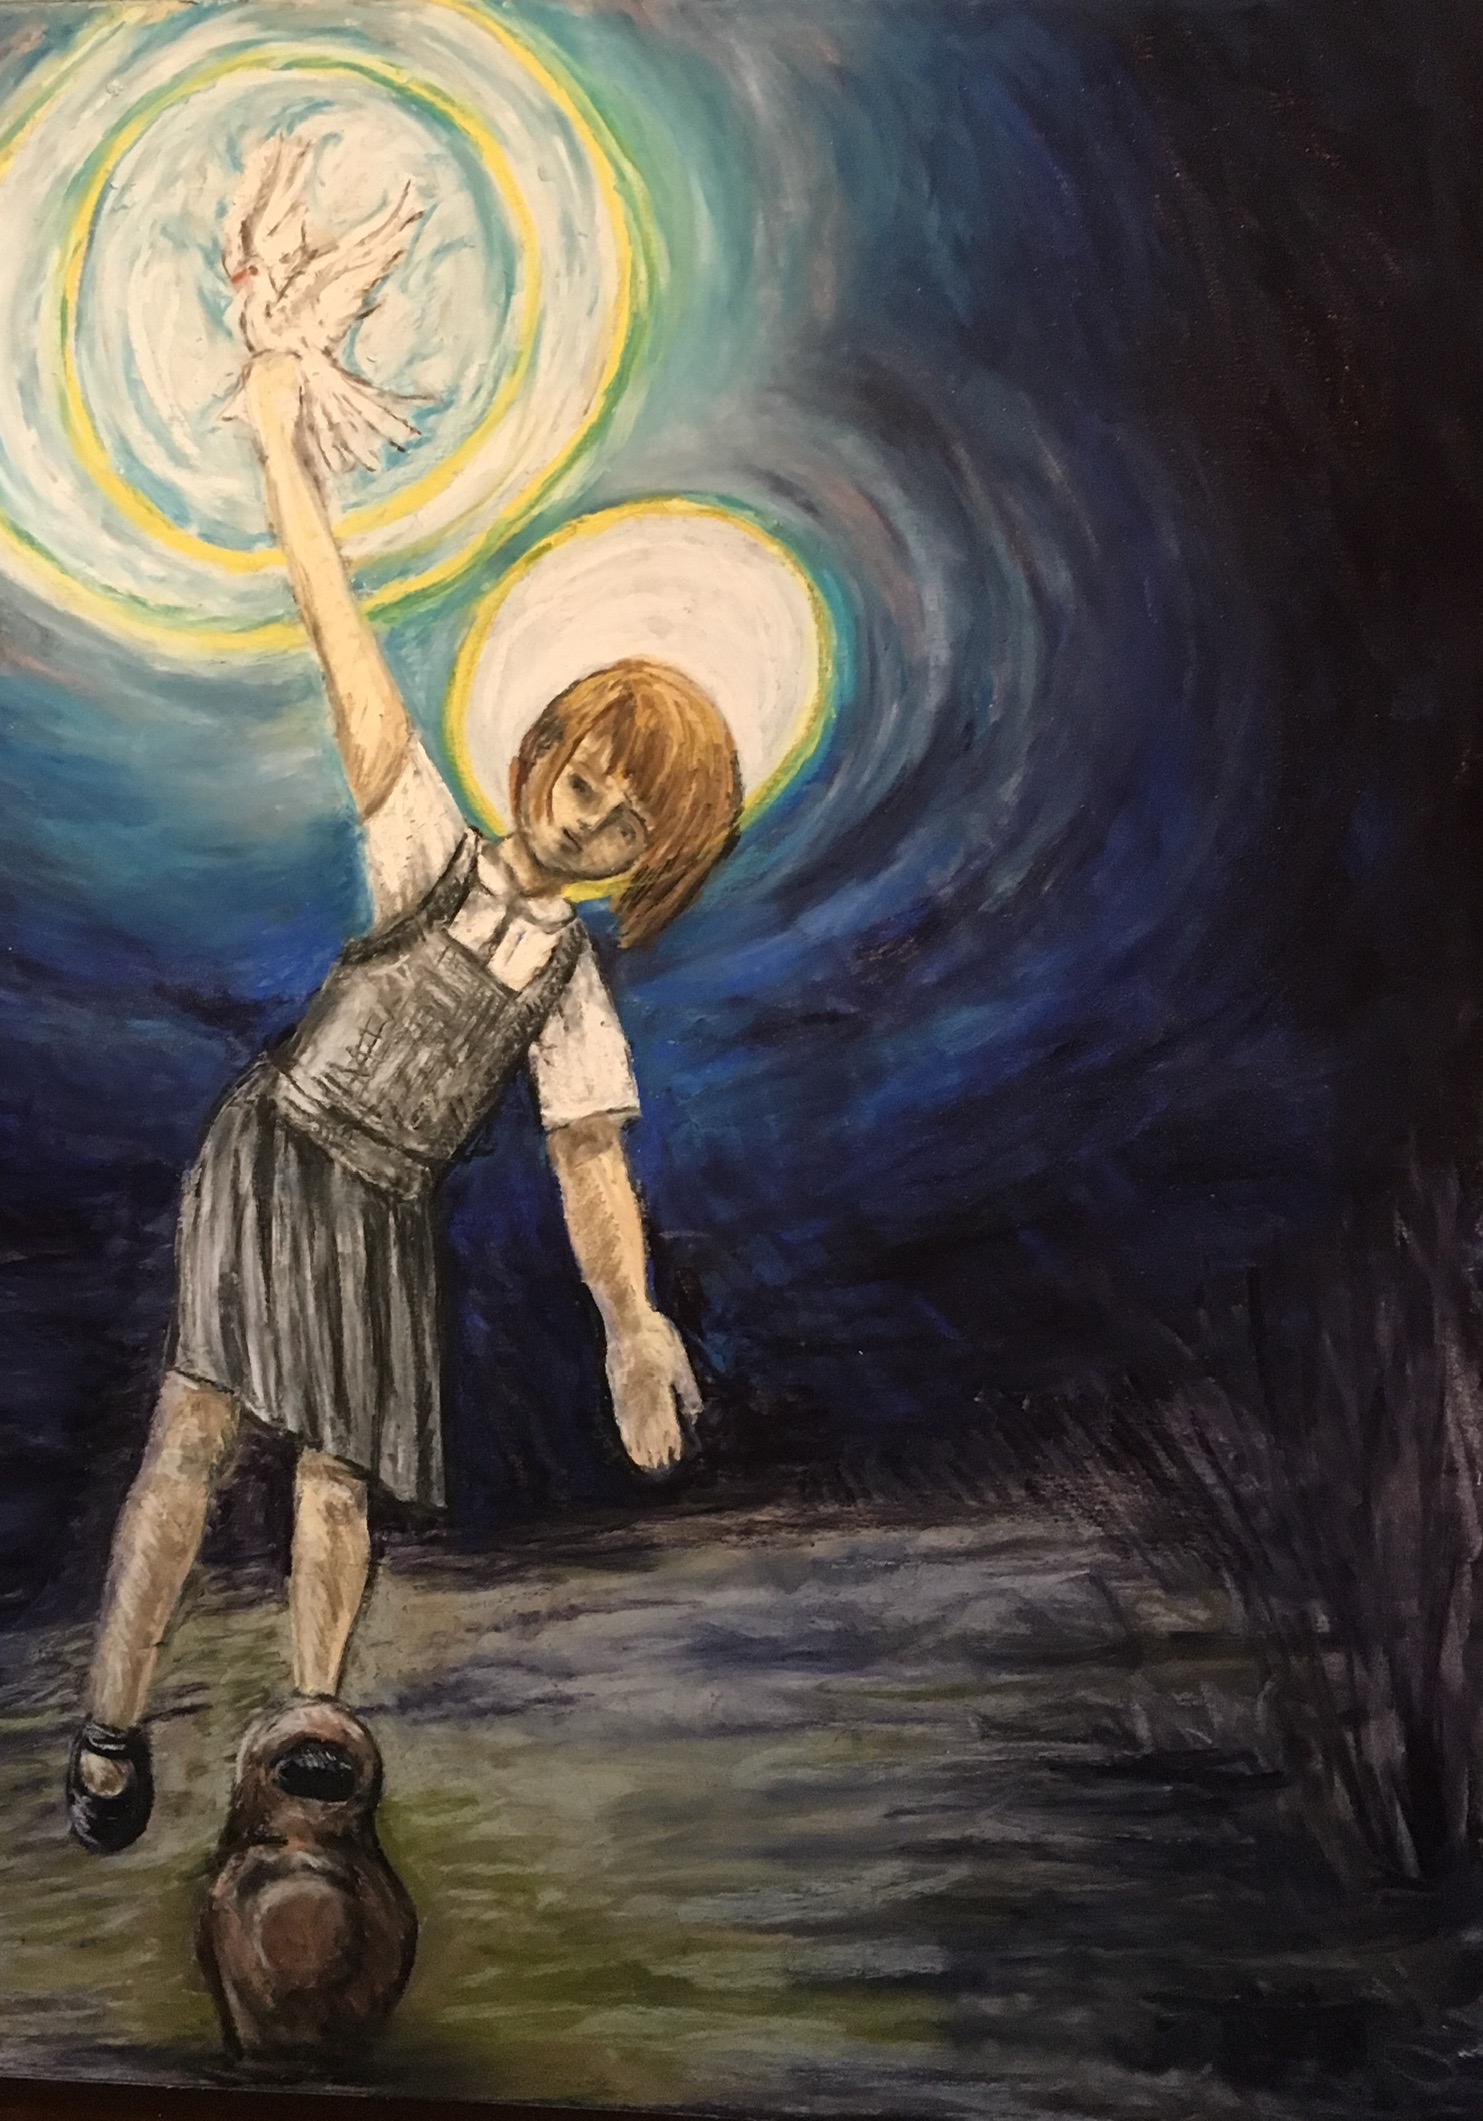 pastel drawing of a girl with jumper holding a dove. she looks down bending over. One foot it hooked into a lead weight